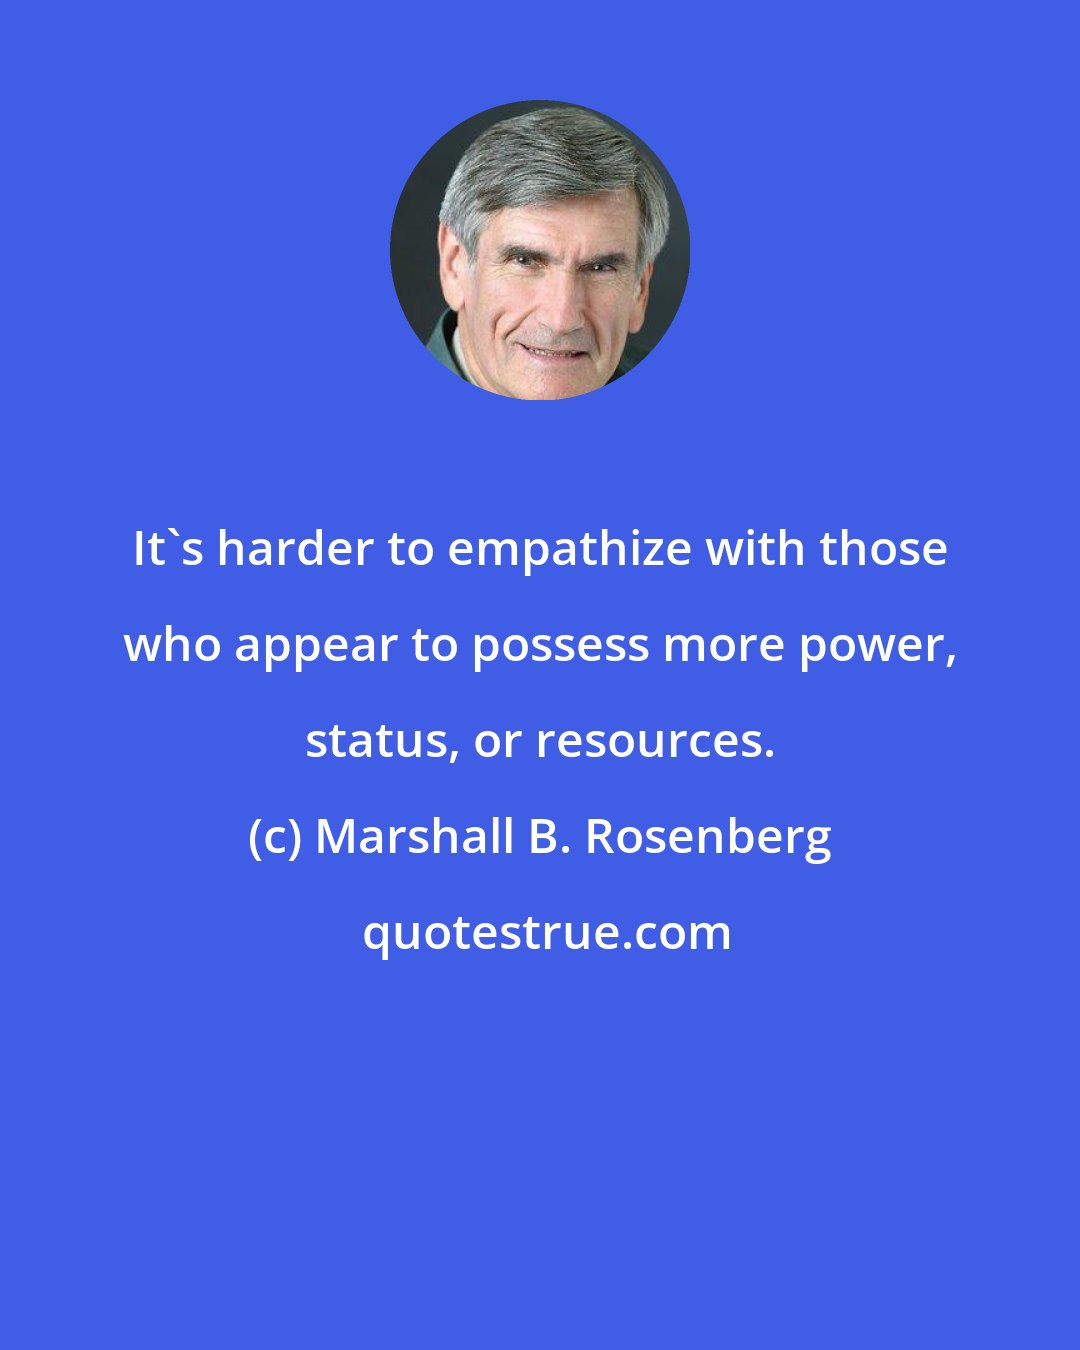 Marshall B. Rosenberg: It's harder to empathize with those who appear to possess more power, status, or resources.